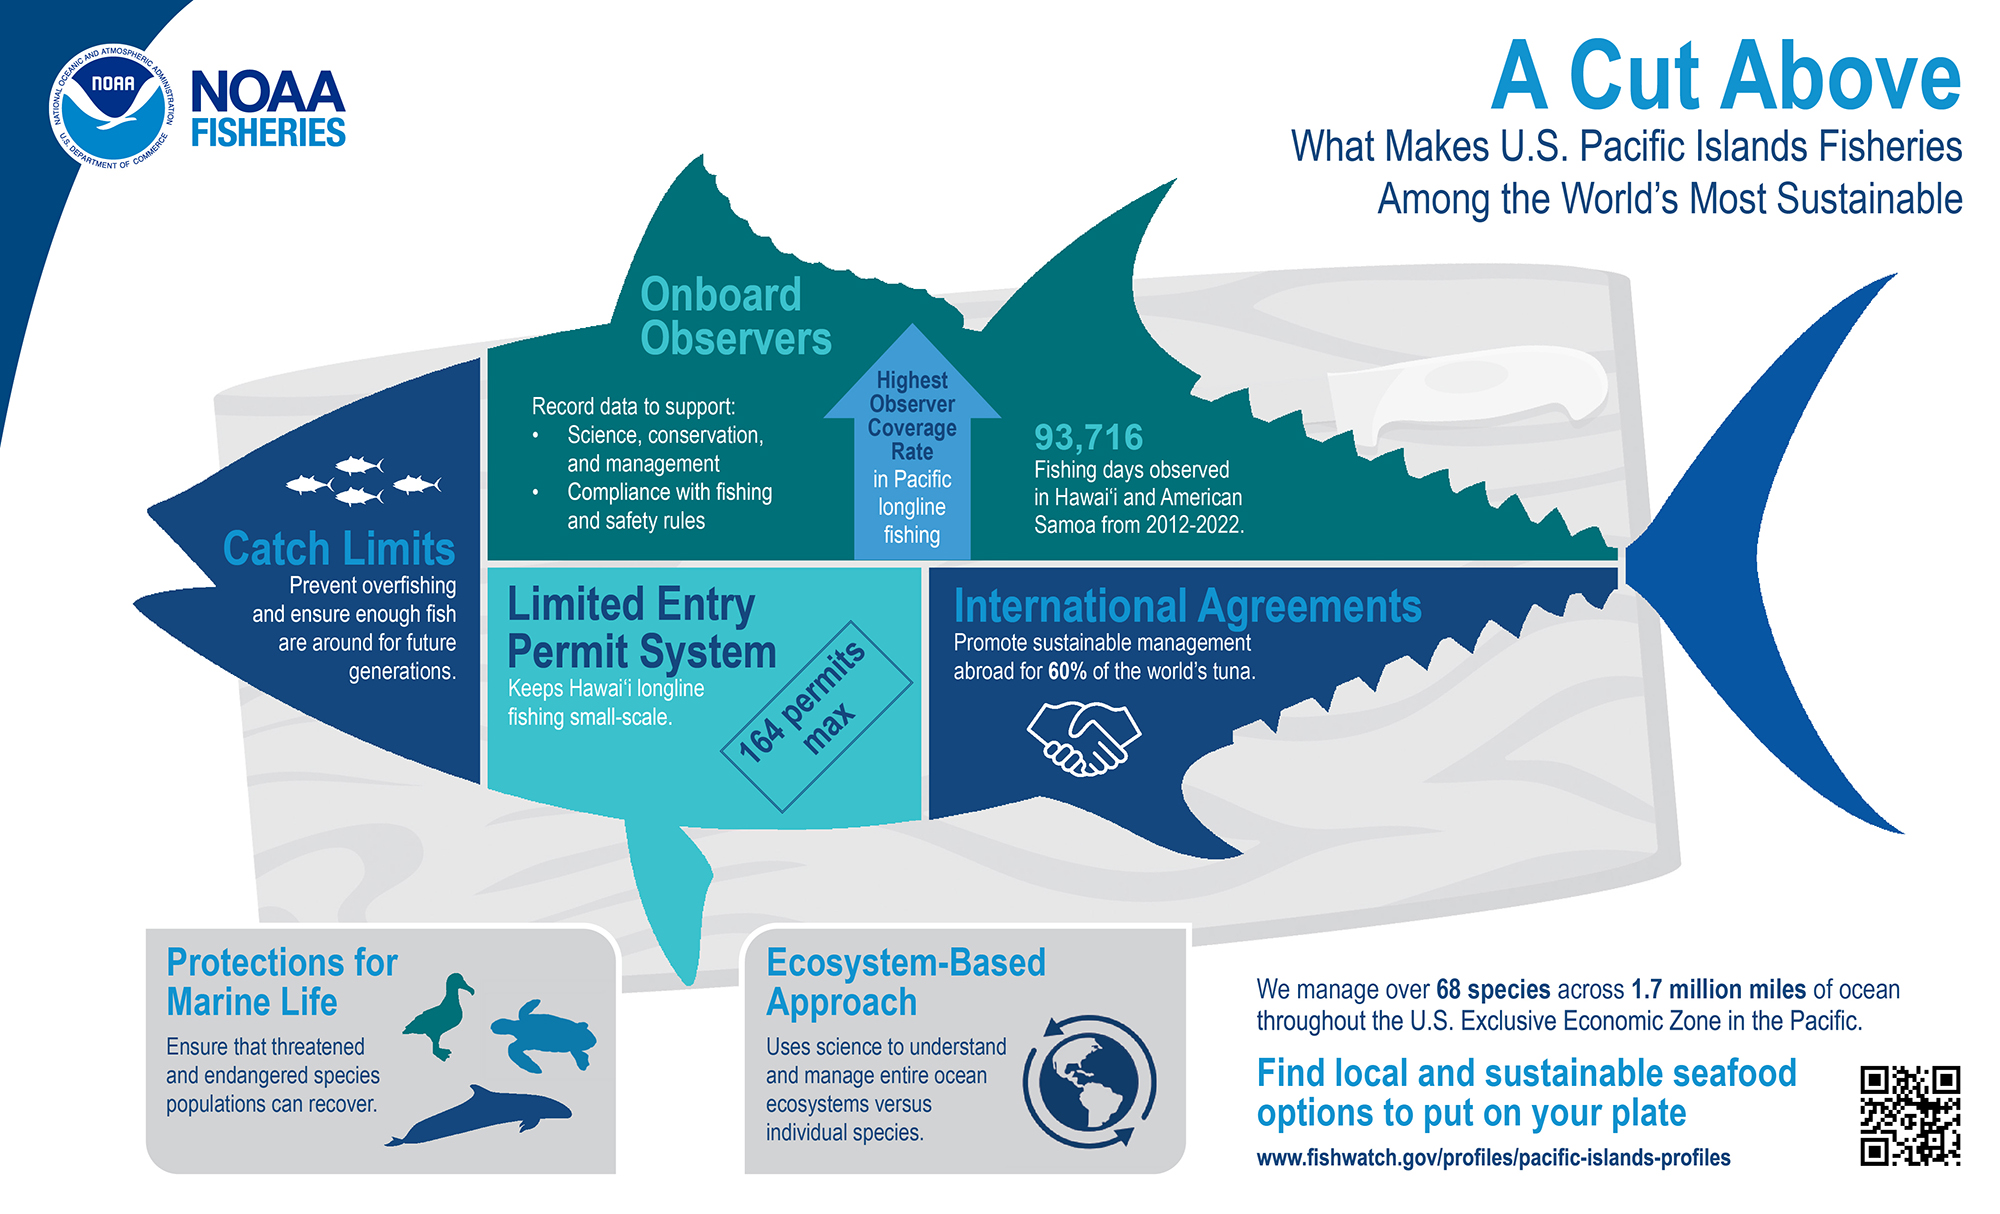 A Cut Above” Pacific Islands Sustainable Fisheries Infographic